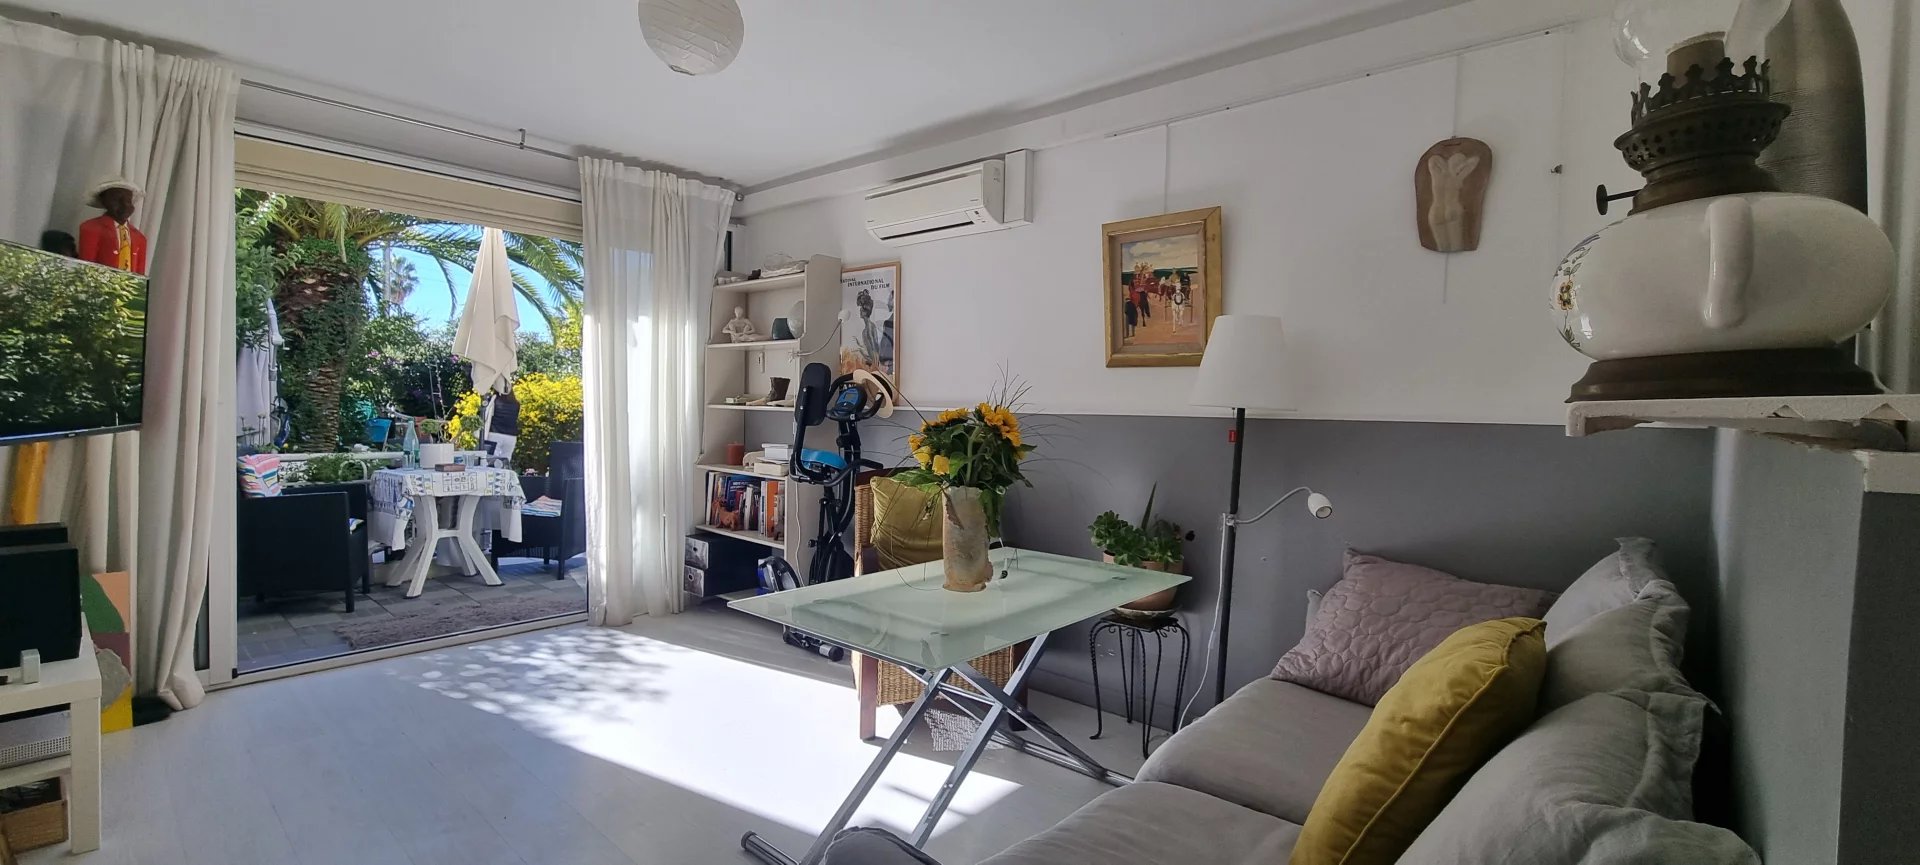 Cannes Plage du Midi property for sale with private garden